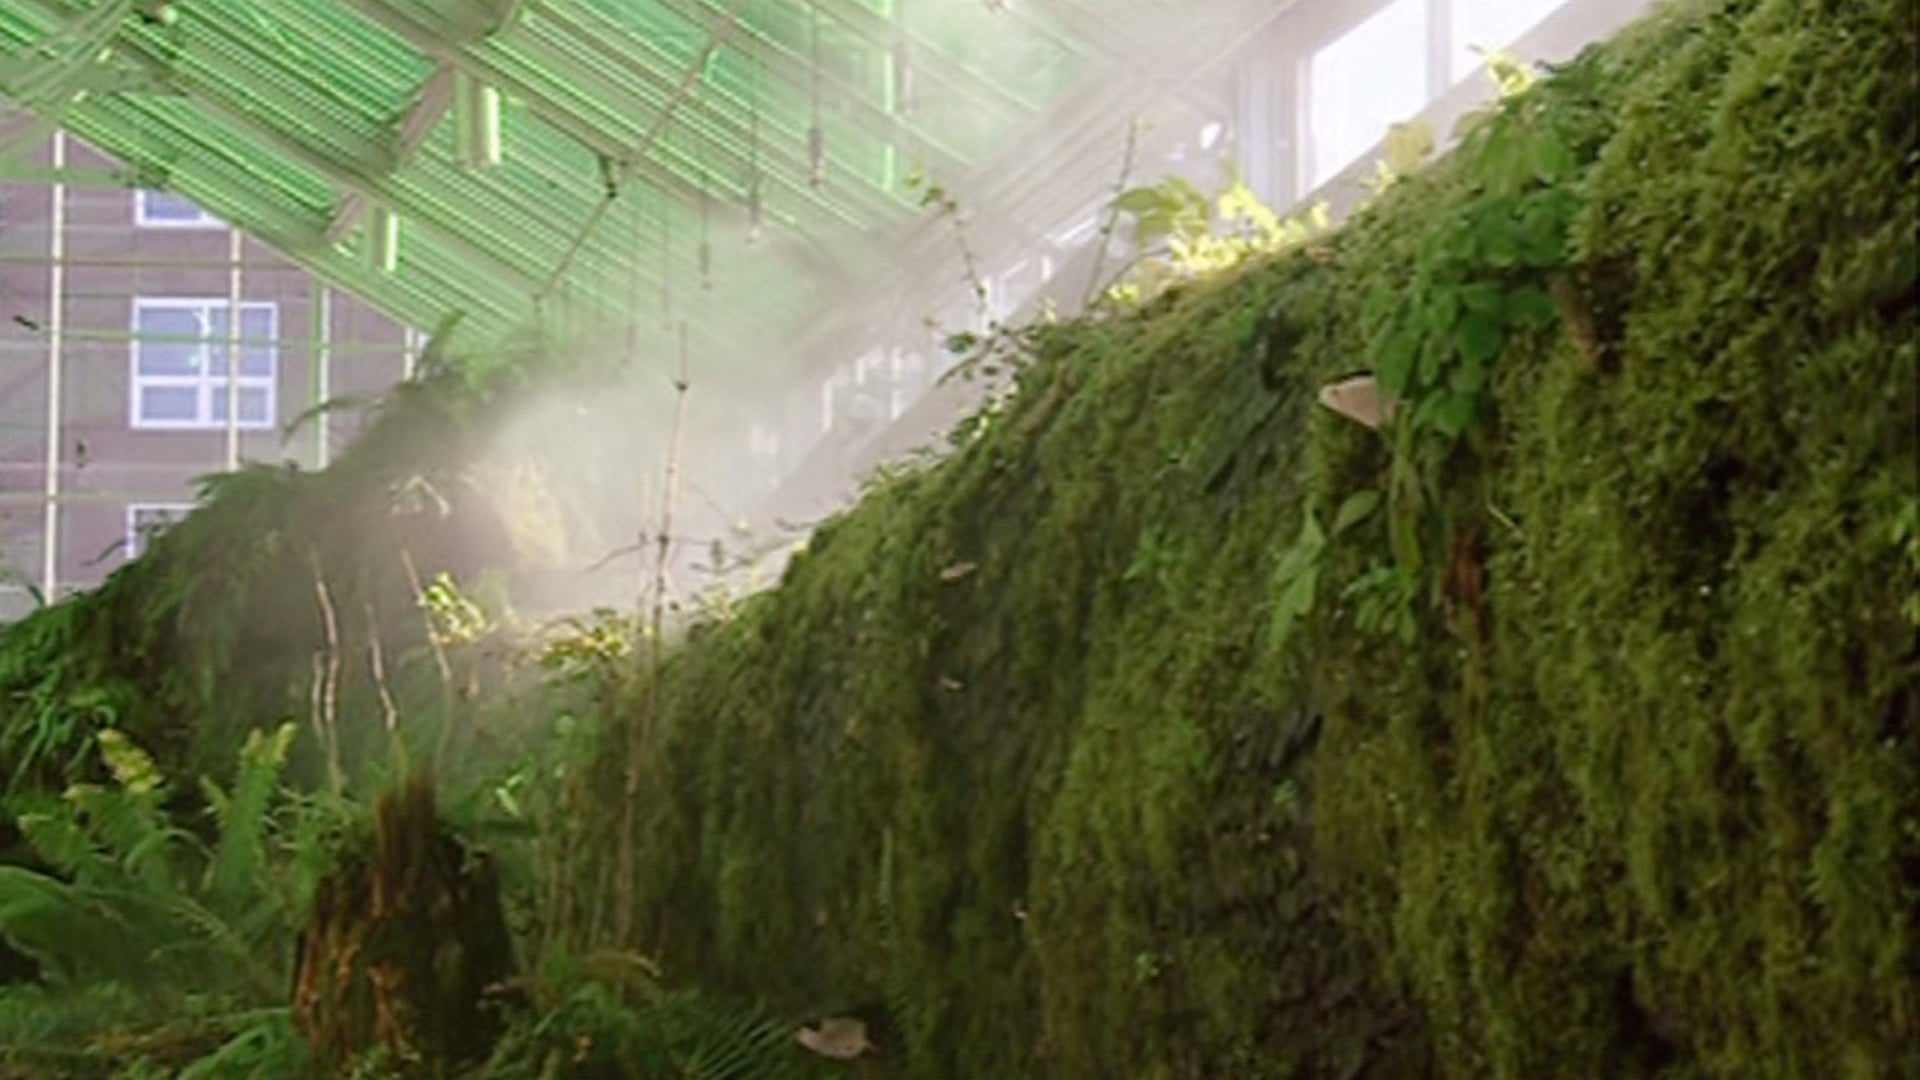 A group of moss and other greenery in a greenhouse.